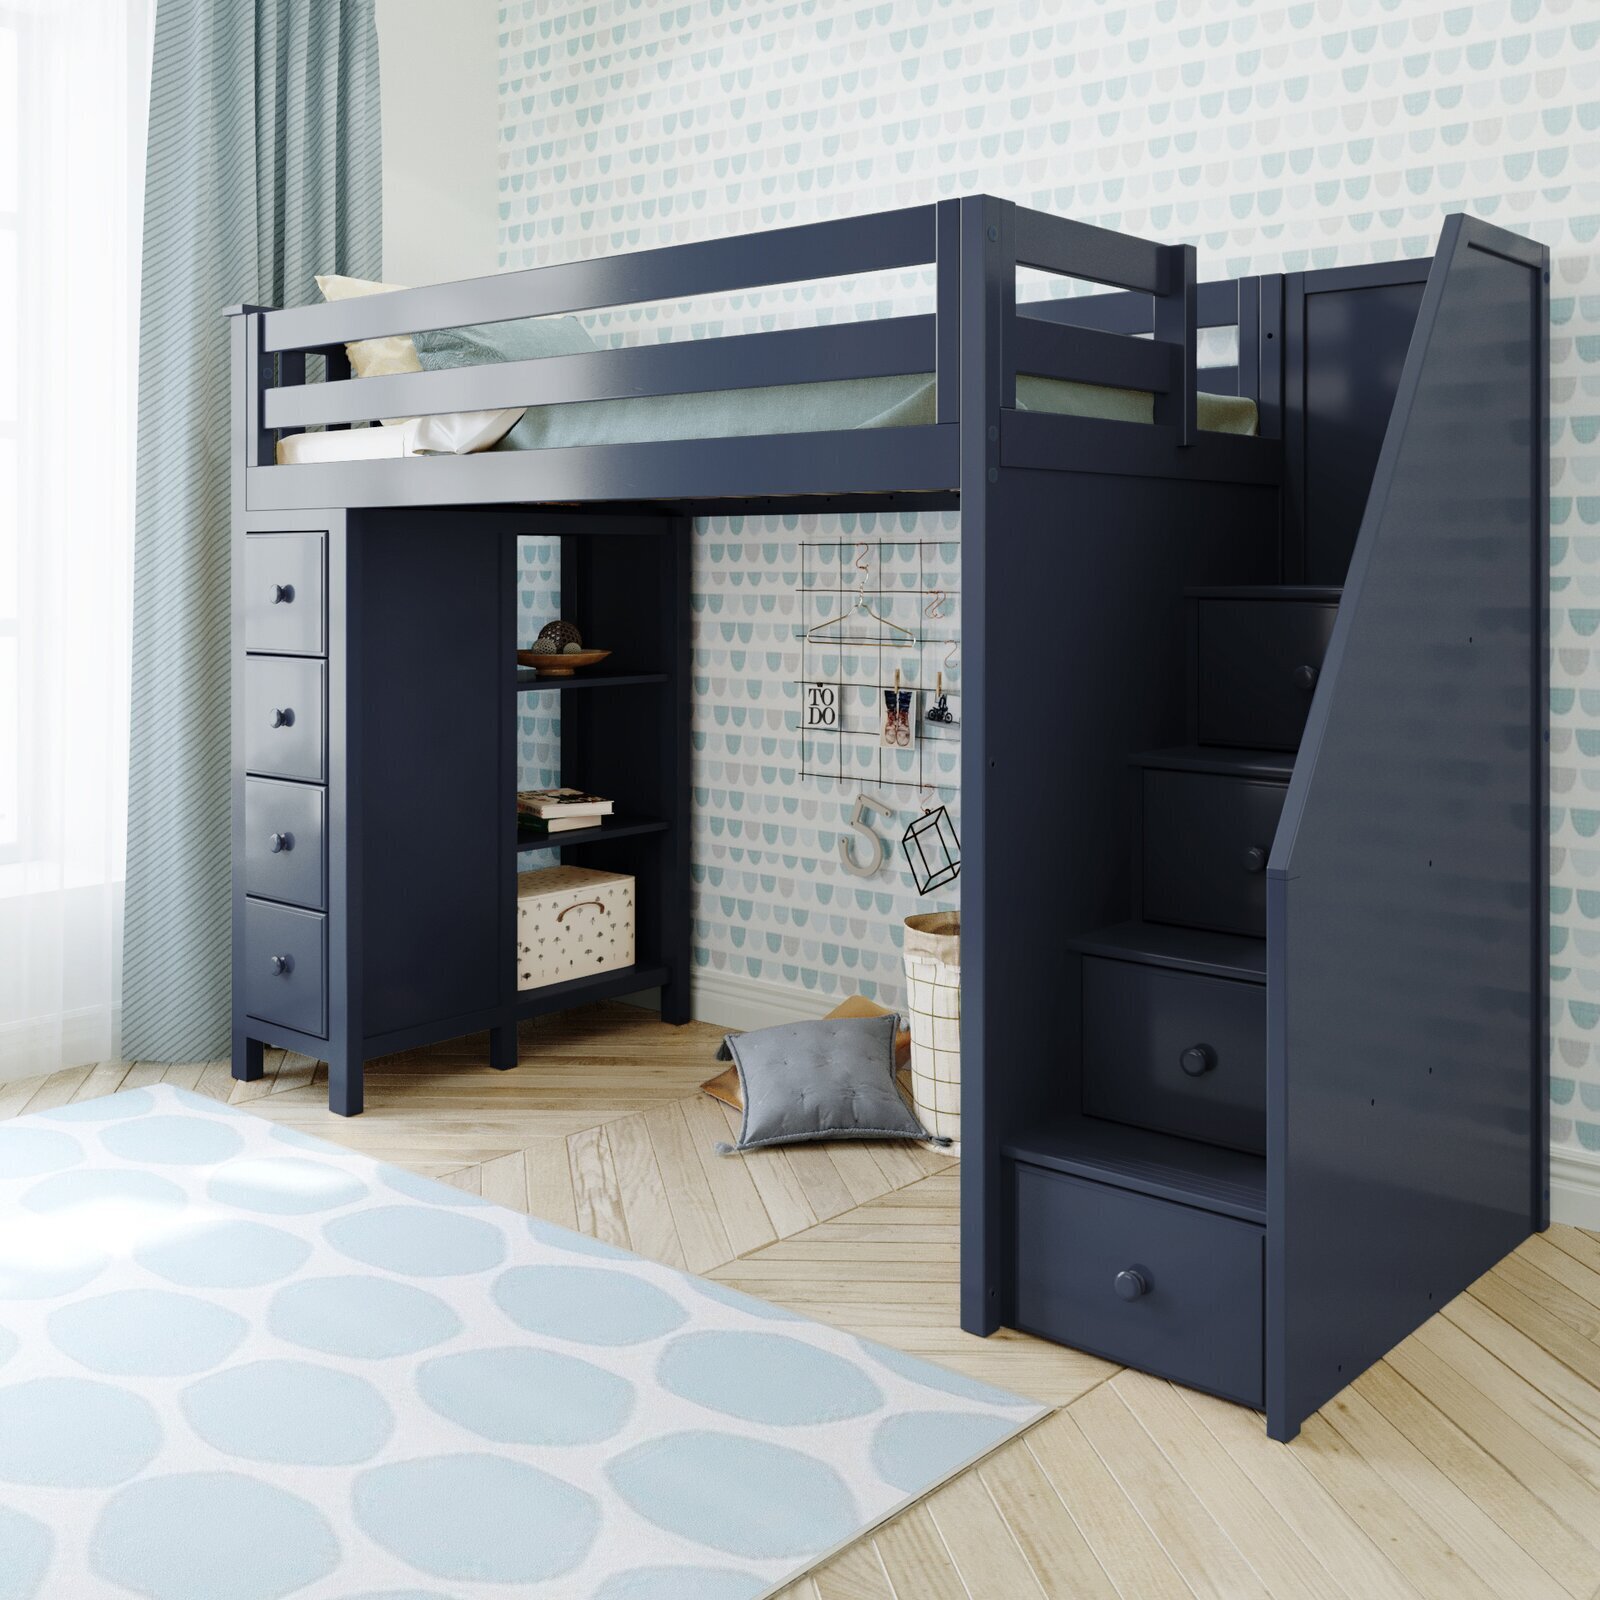 Loft bed with drawers for steps